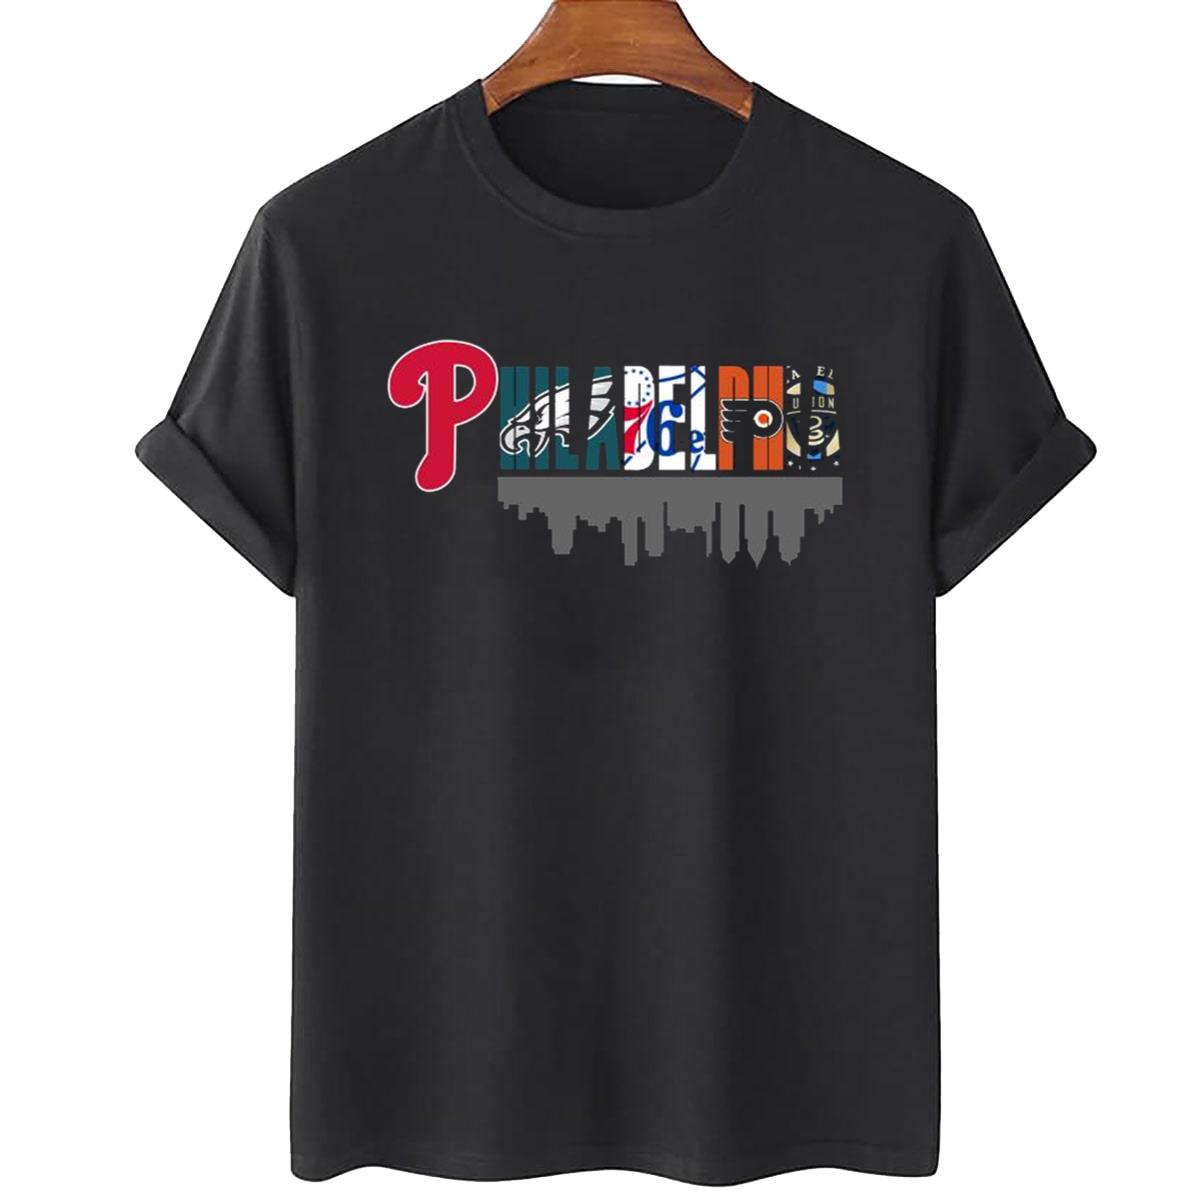 eagles and phillies shirt